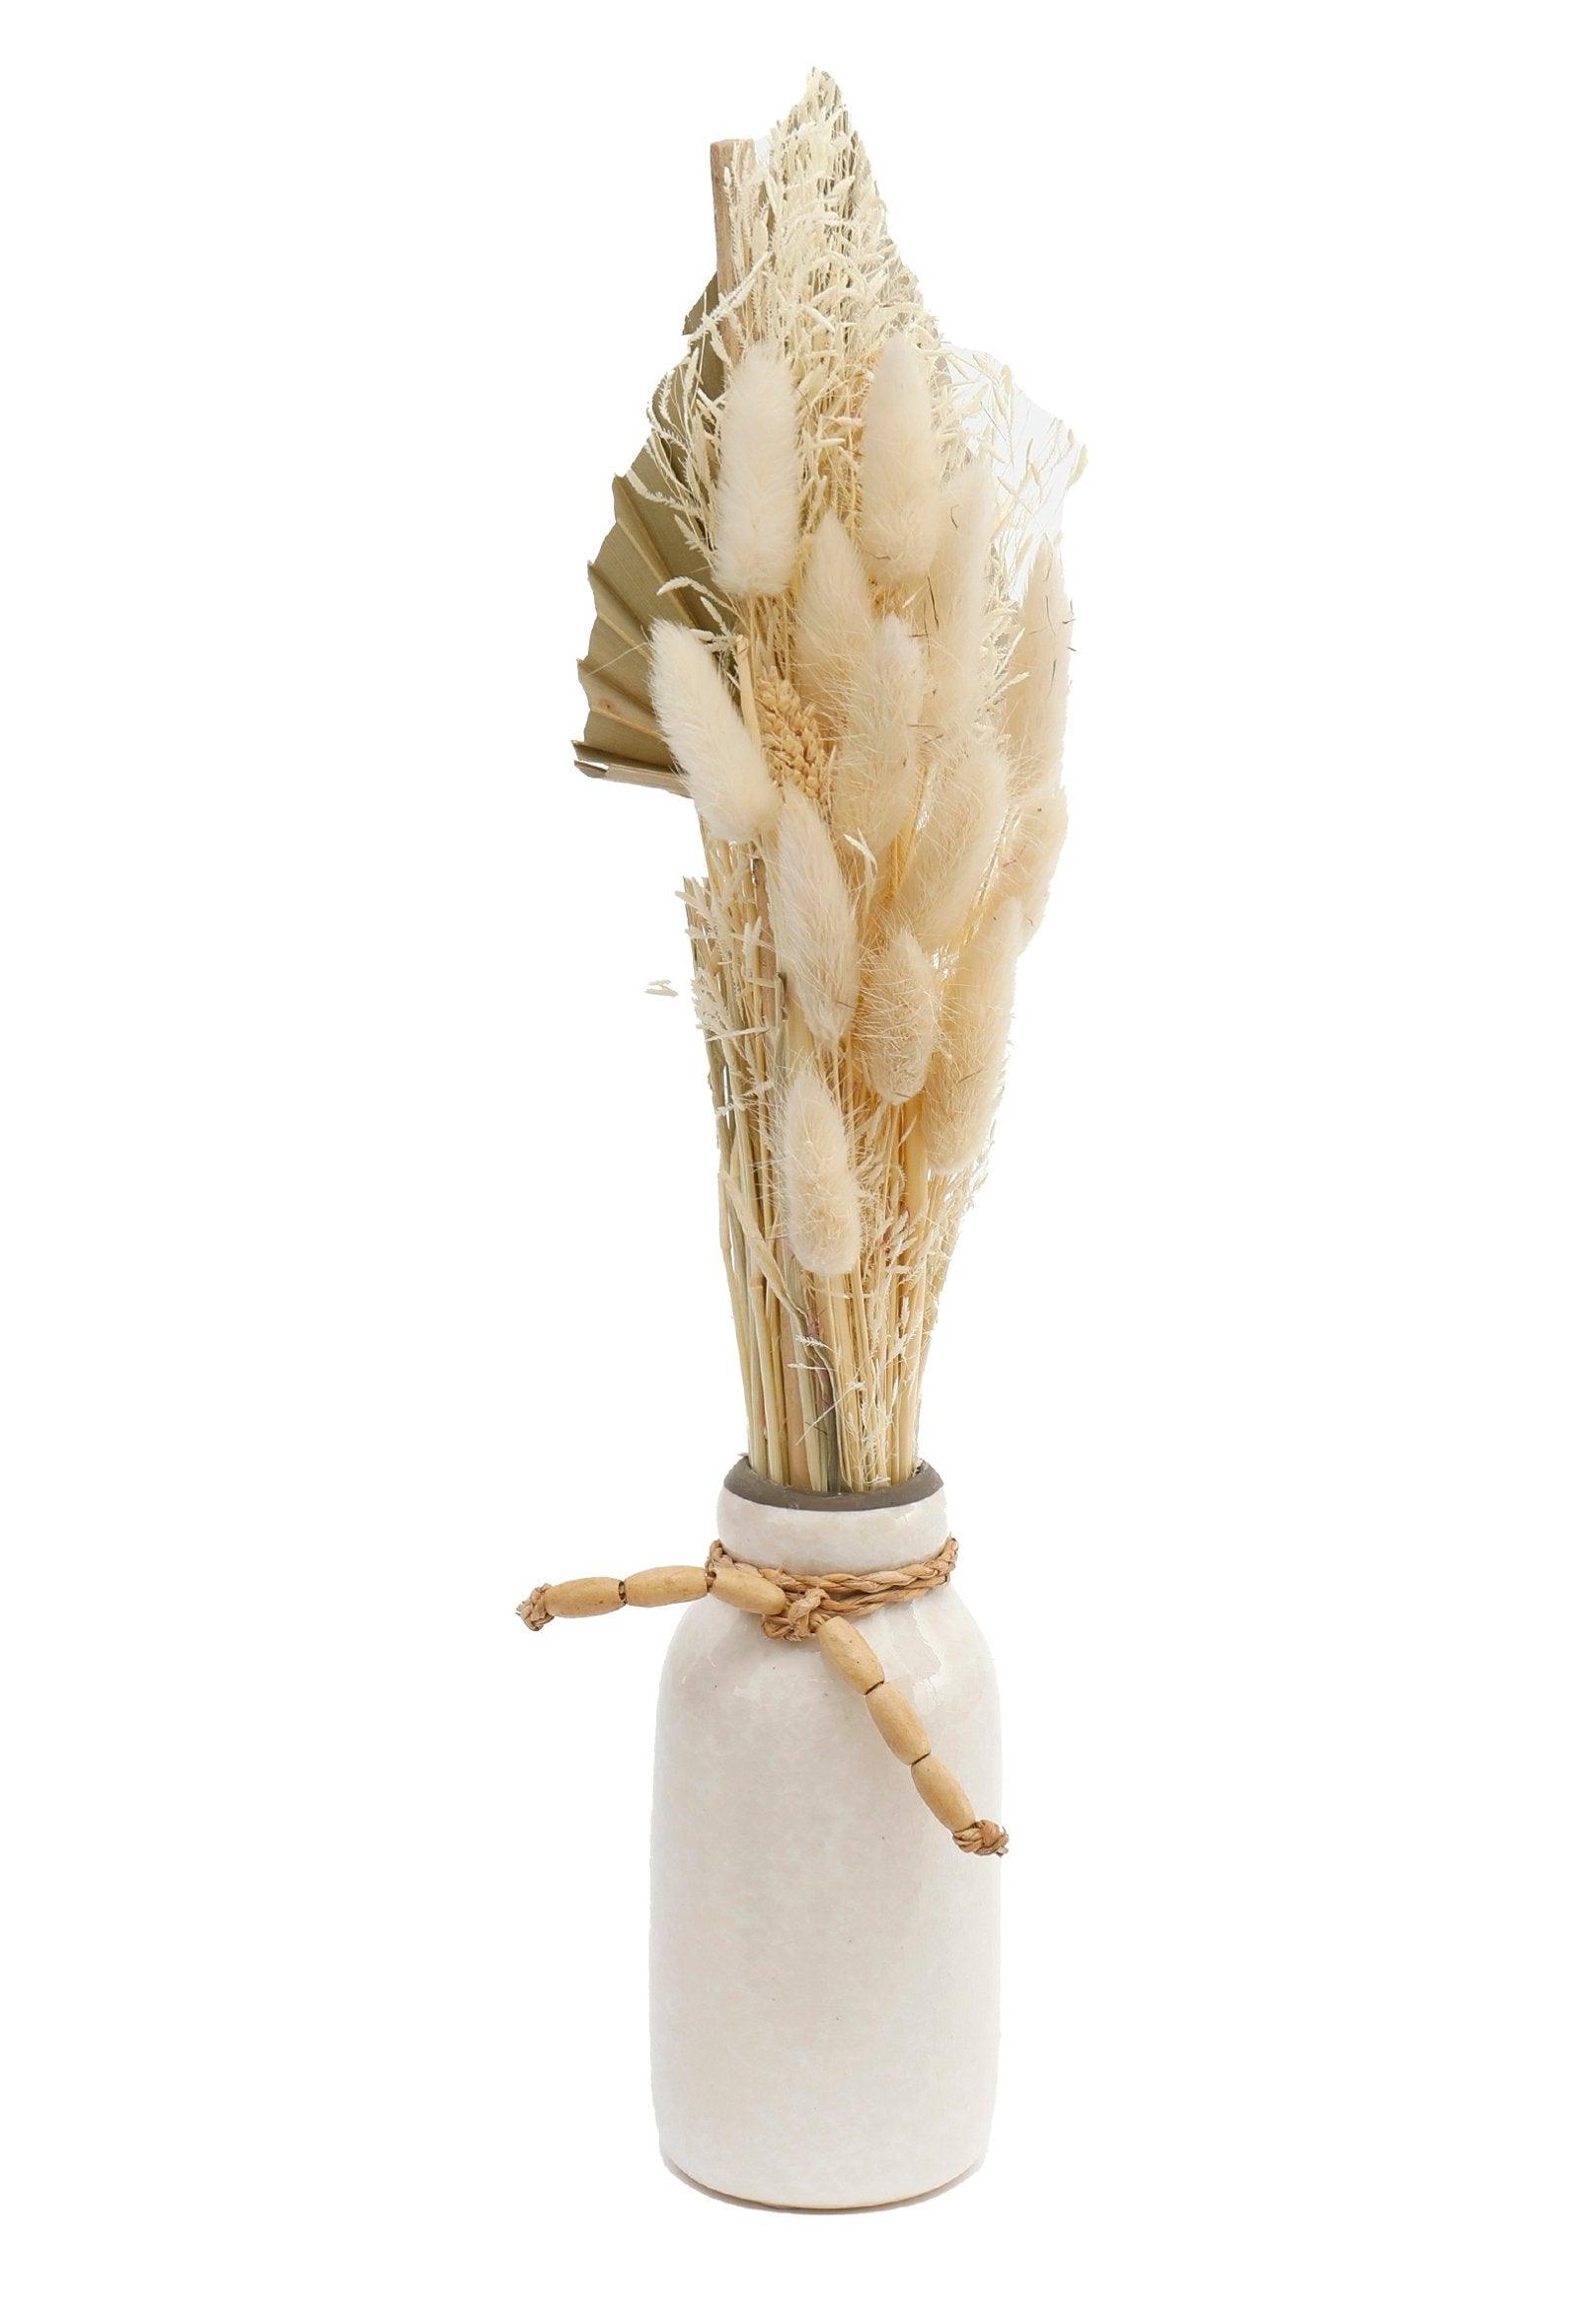 View Mixed Dried Flowers In Ceramic Vase information